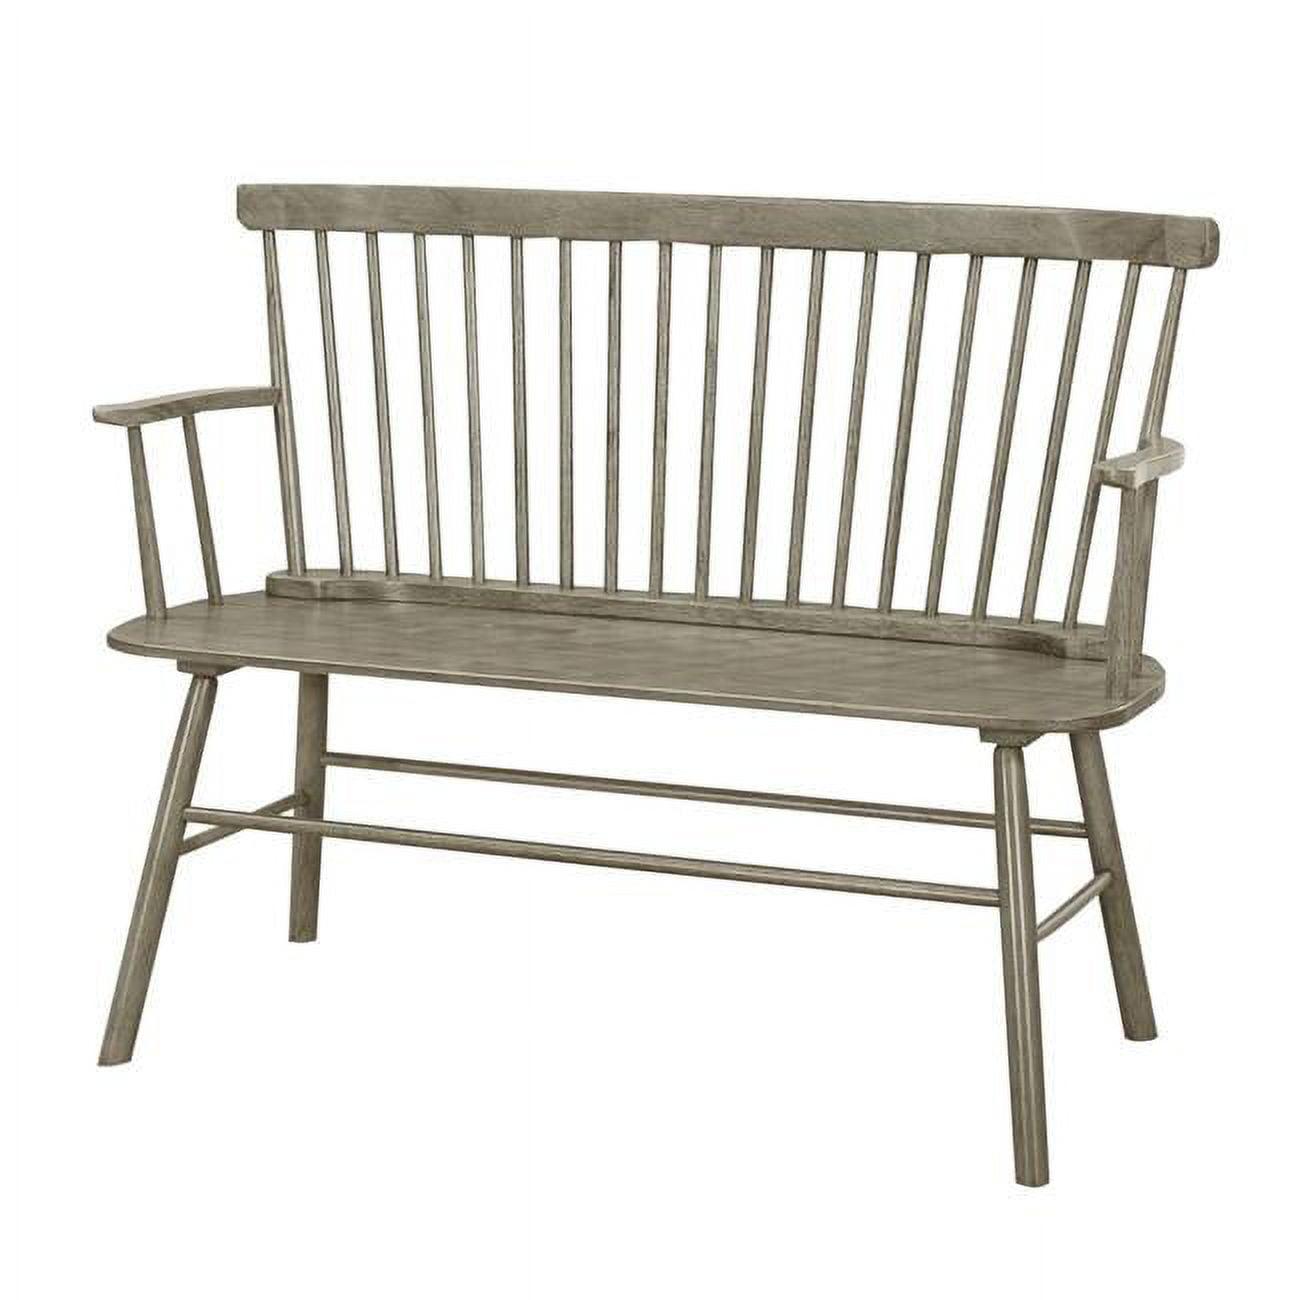 Gray Solid Wood Spindle Back Bench with Splayed Legs, 48"